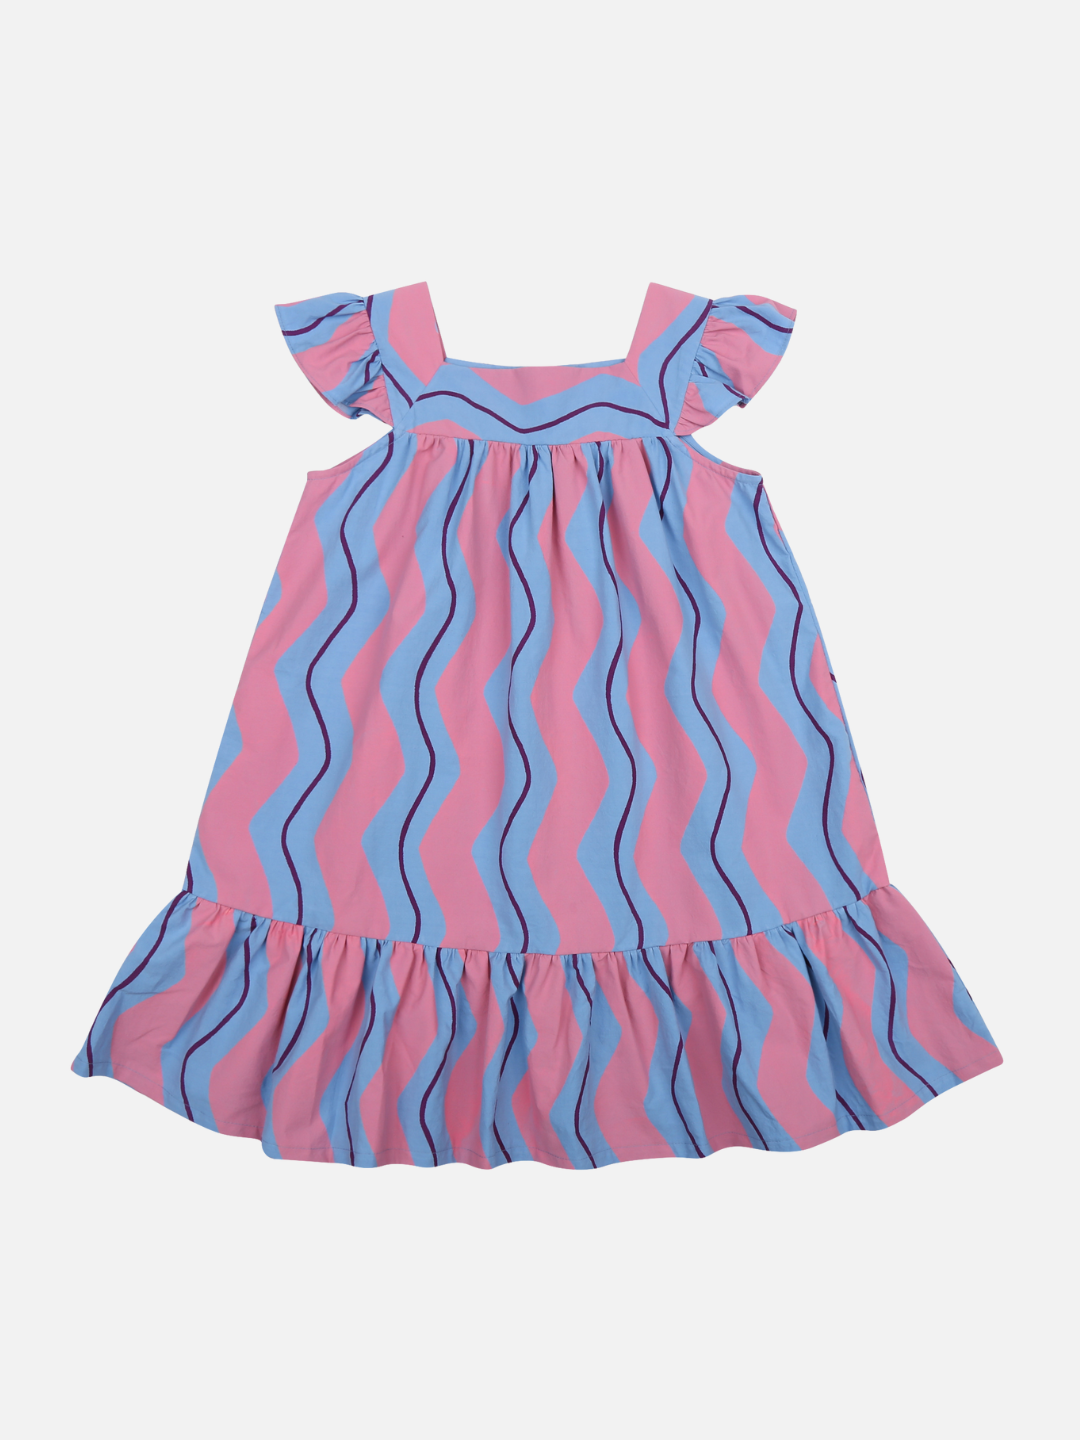 Front of Wave Stripe Dress. Wide pink vertical squiggly stripes and thin purple vertical squiggly stripes on a light blue background. Ruffled hem and ruffled cap sleeve.